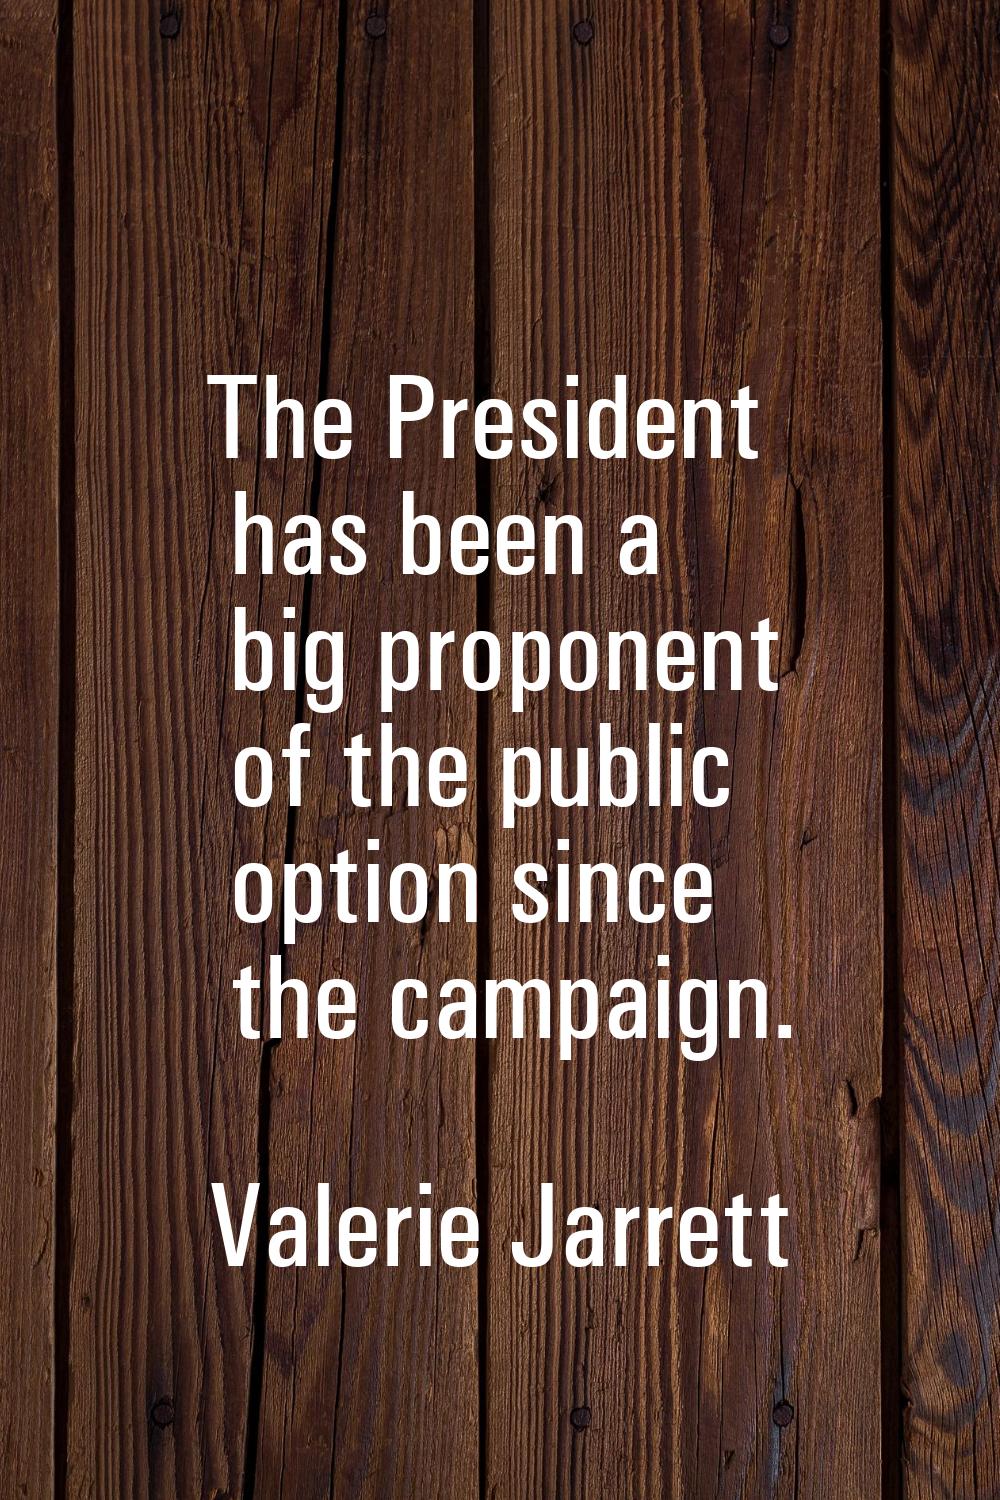 The President has been a big proponent of the public option since the campaign.